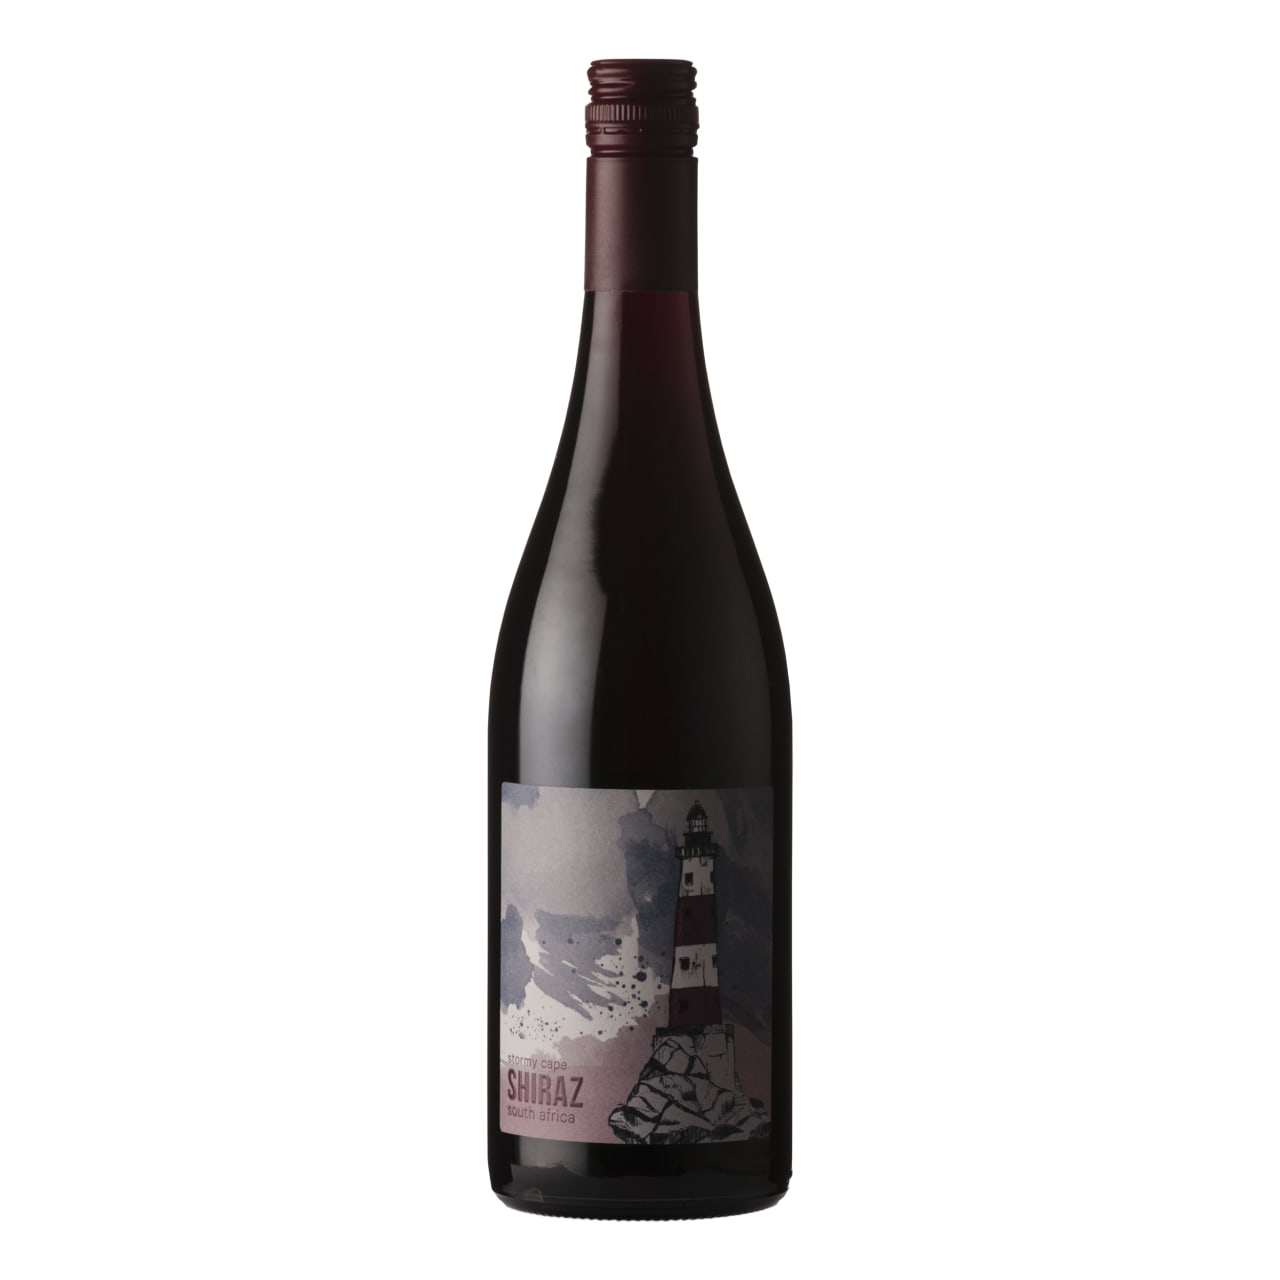 Generous berry fruit flavours are found on the ripe and enticing nose.